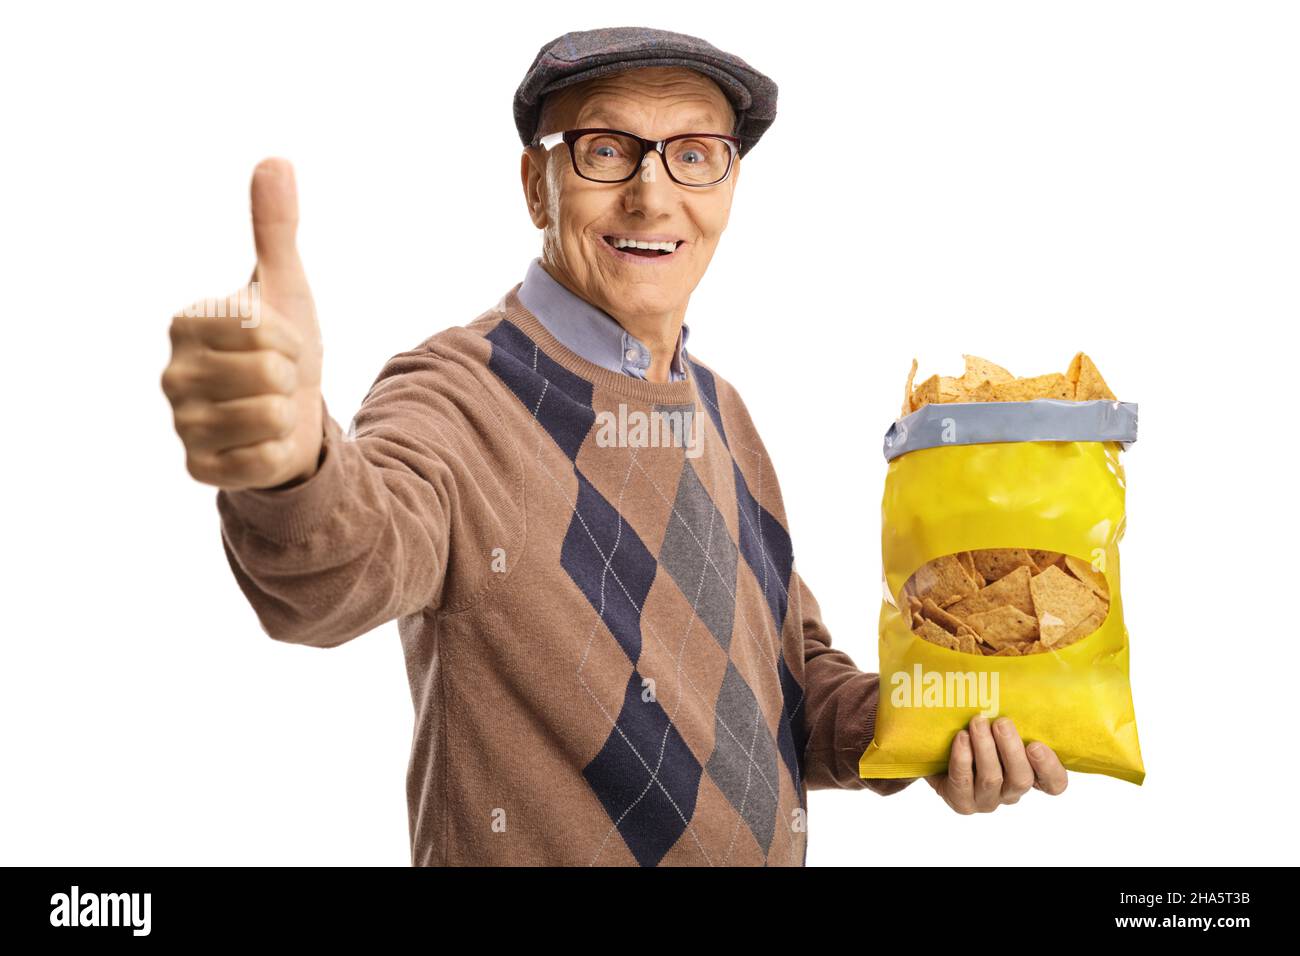 Cheerful elderly man holding a pack of tortilla chips and showing thumbs up isolated on white background Stock Photo